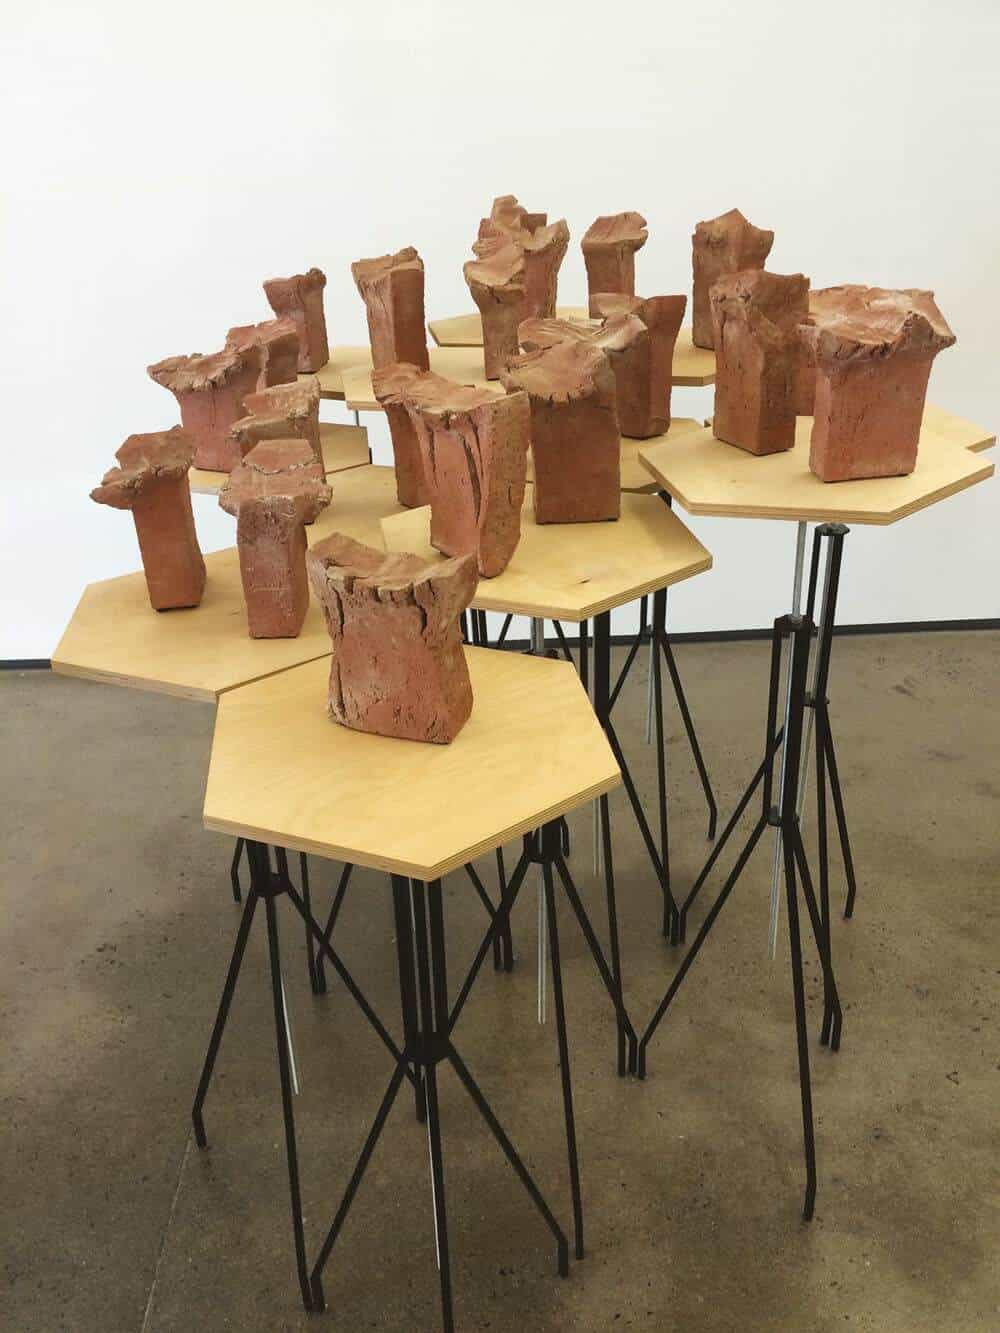 Paul Edmunds, Sames, 2014. Brick clay and hardware, Dimensions variable. Image courtesy of the artist. 